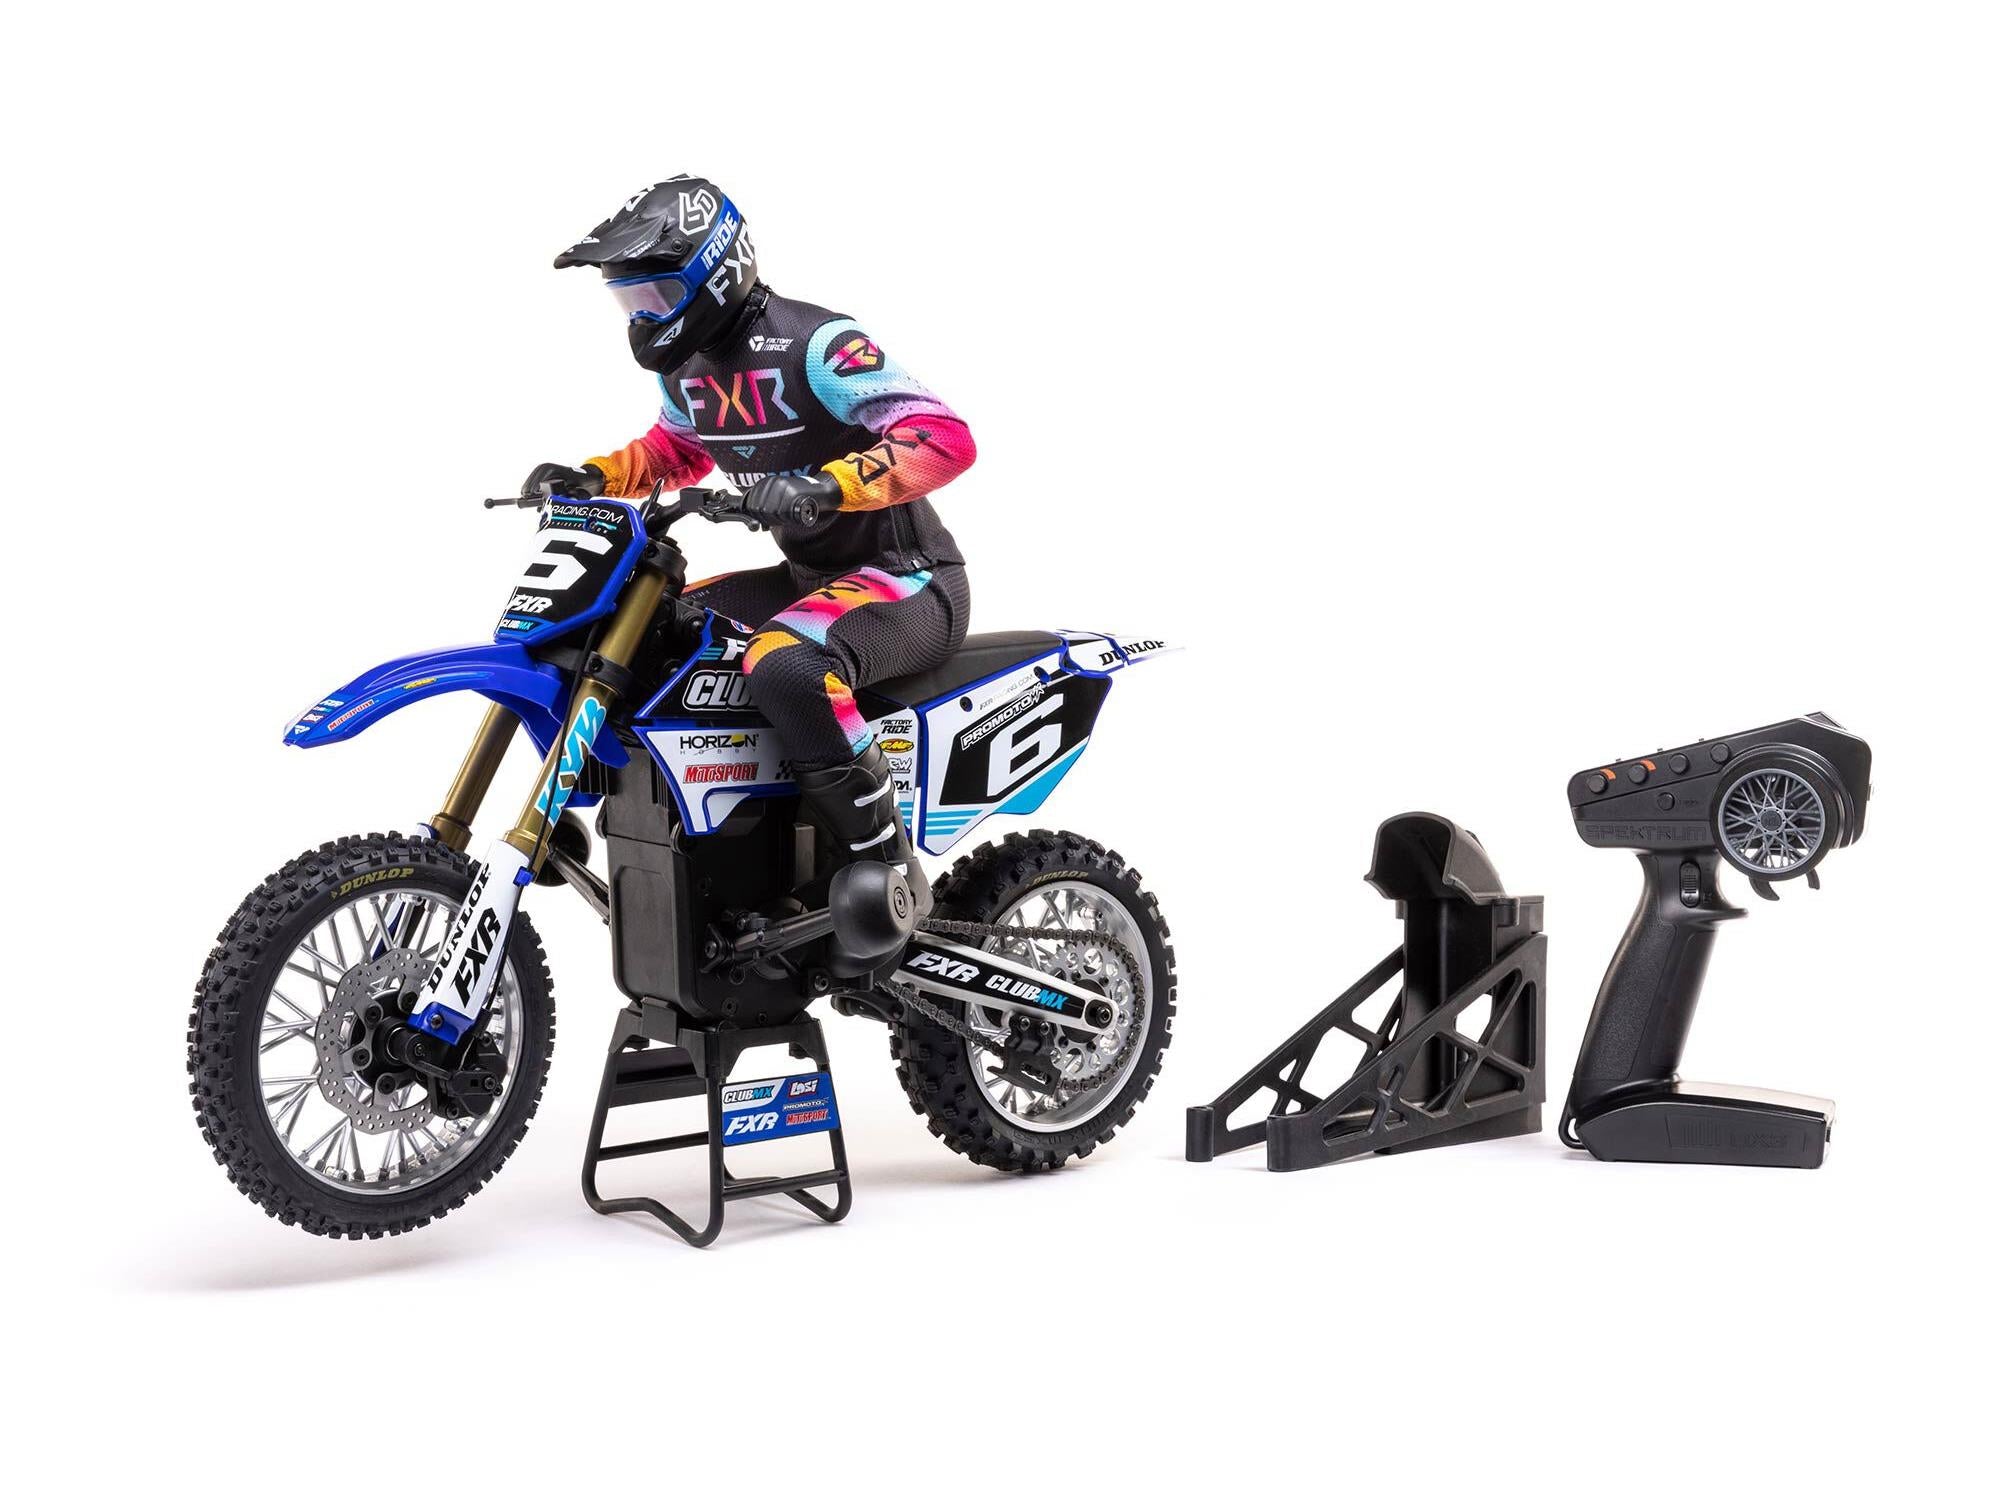 1/4 scale Promoto-MX Motorcycle RTR in Club MX blue color on display